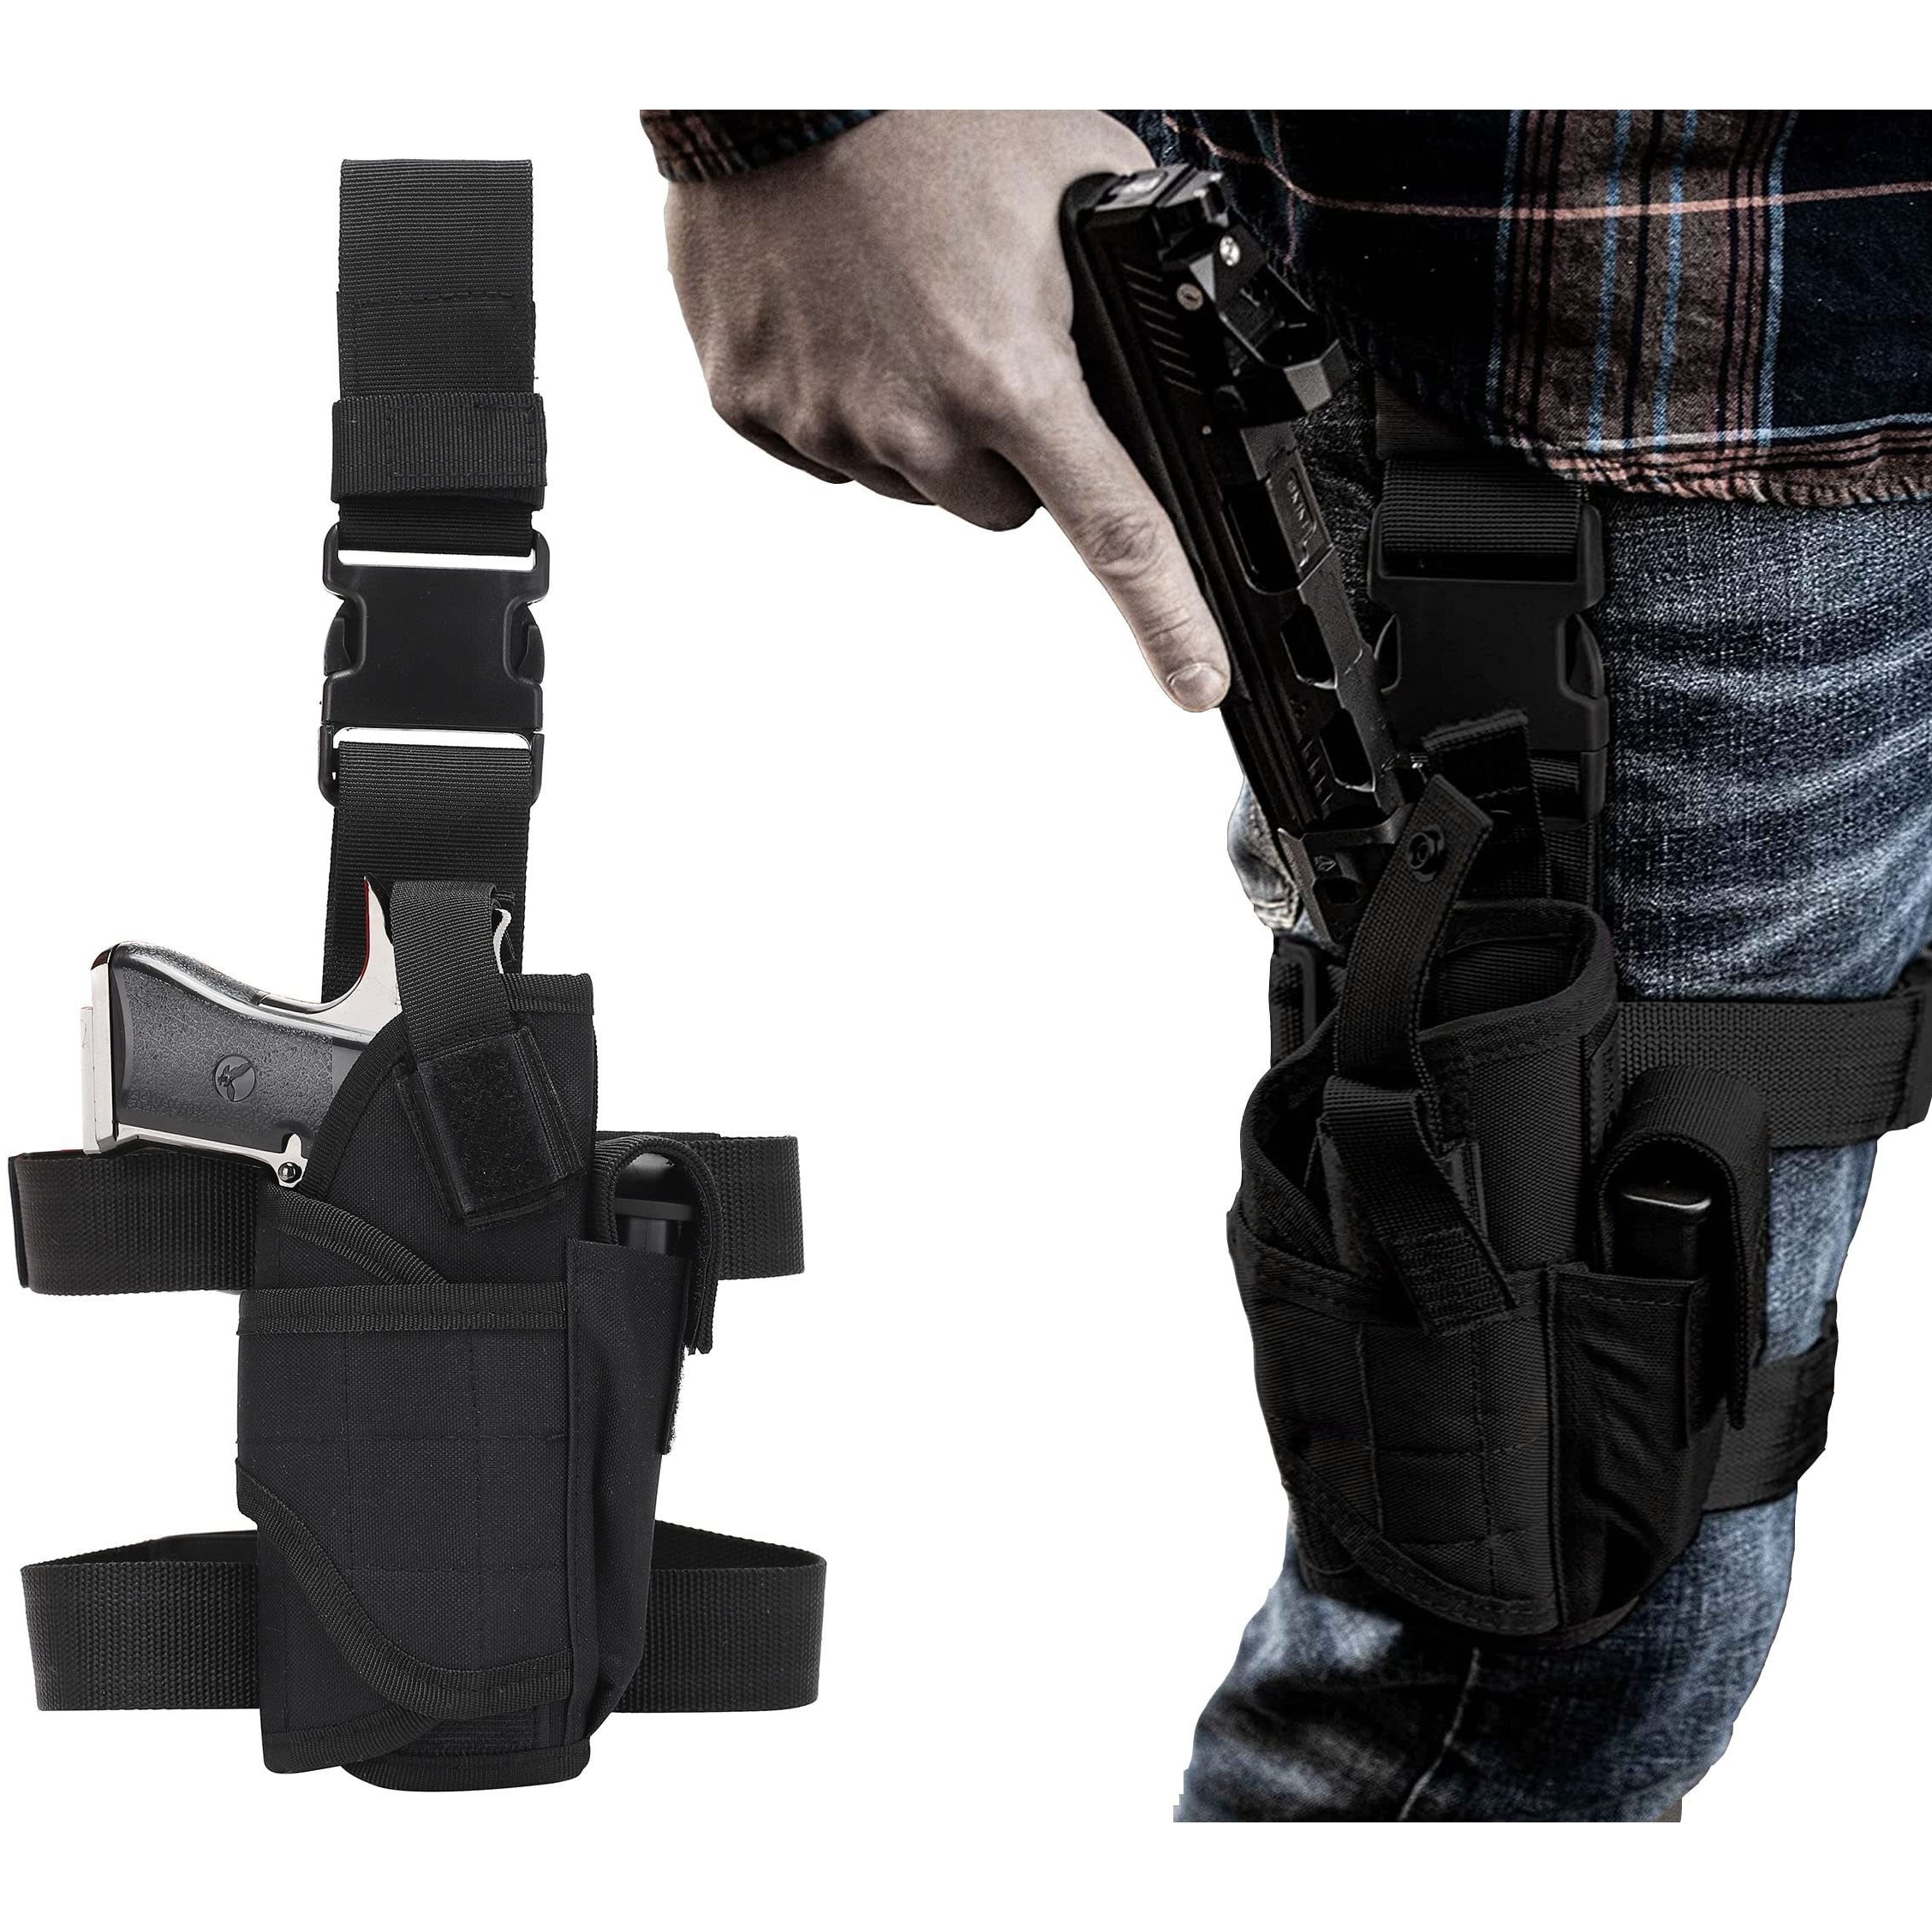 Nylon Gun holster with Magazine pouch and belt loop for Ruger LCP